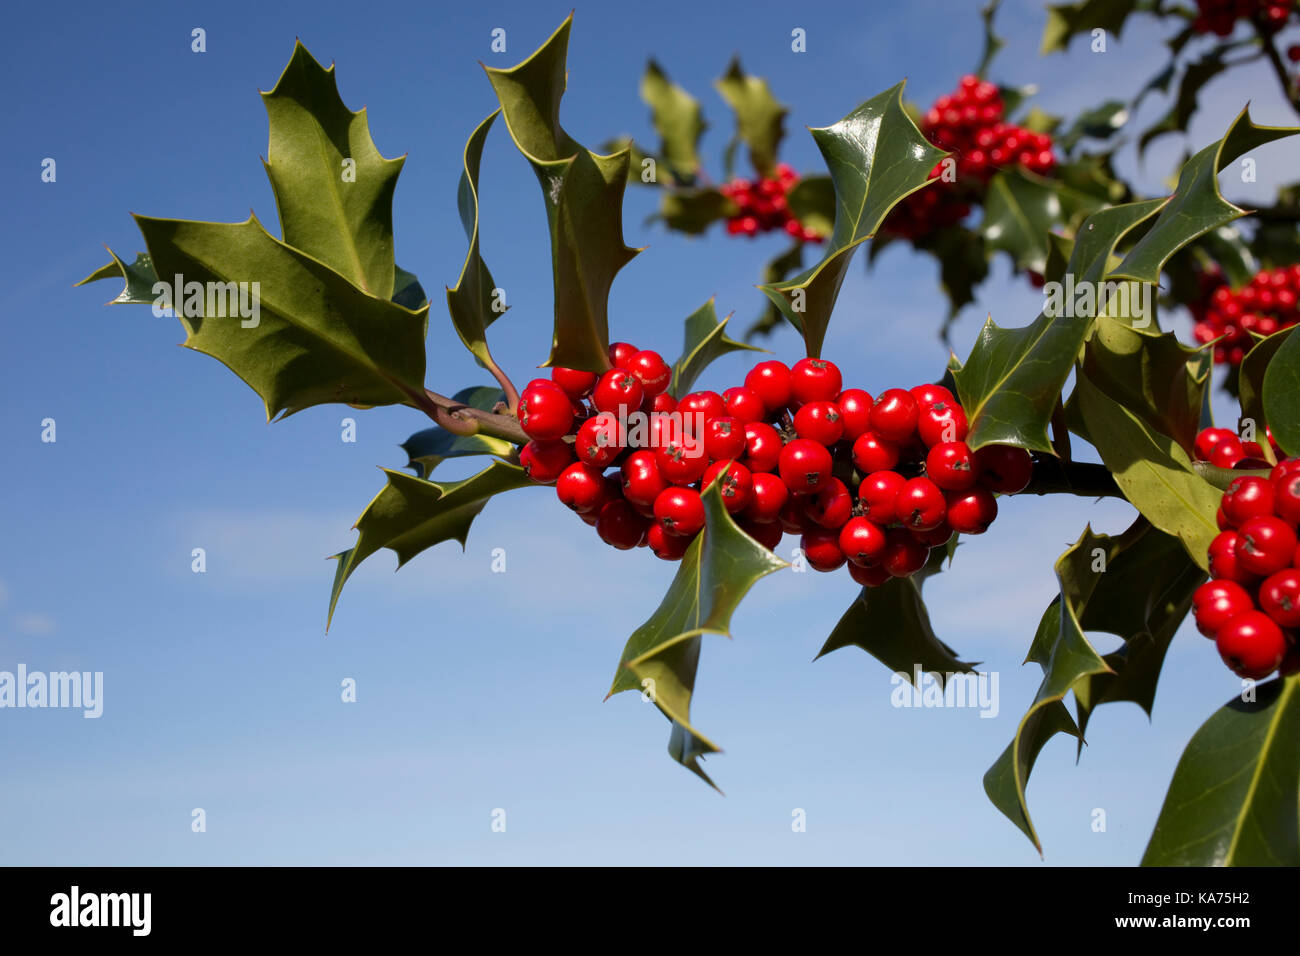 Holly tree Ilex aquafolium laden with bright red berries September 2017 Cotswolds UK Stock Photo